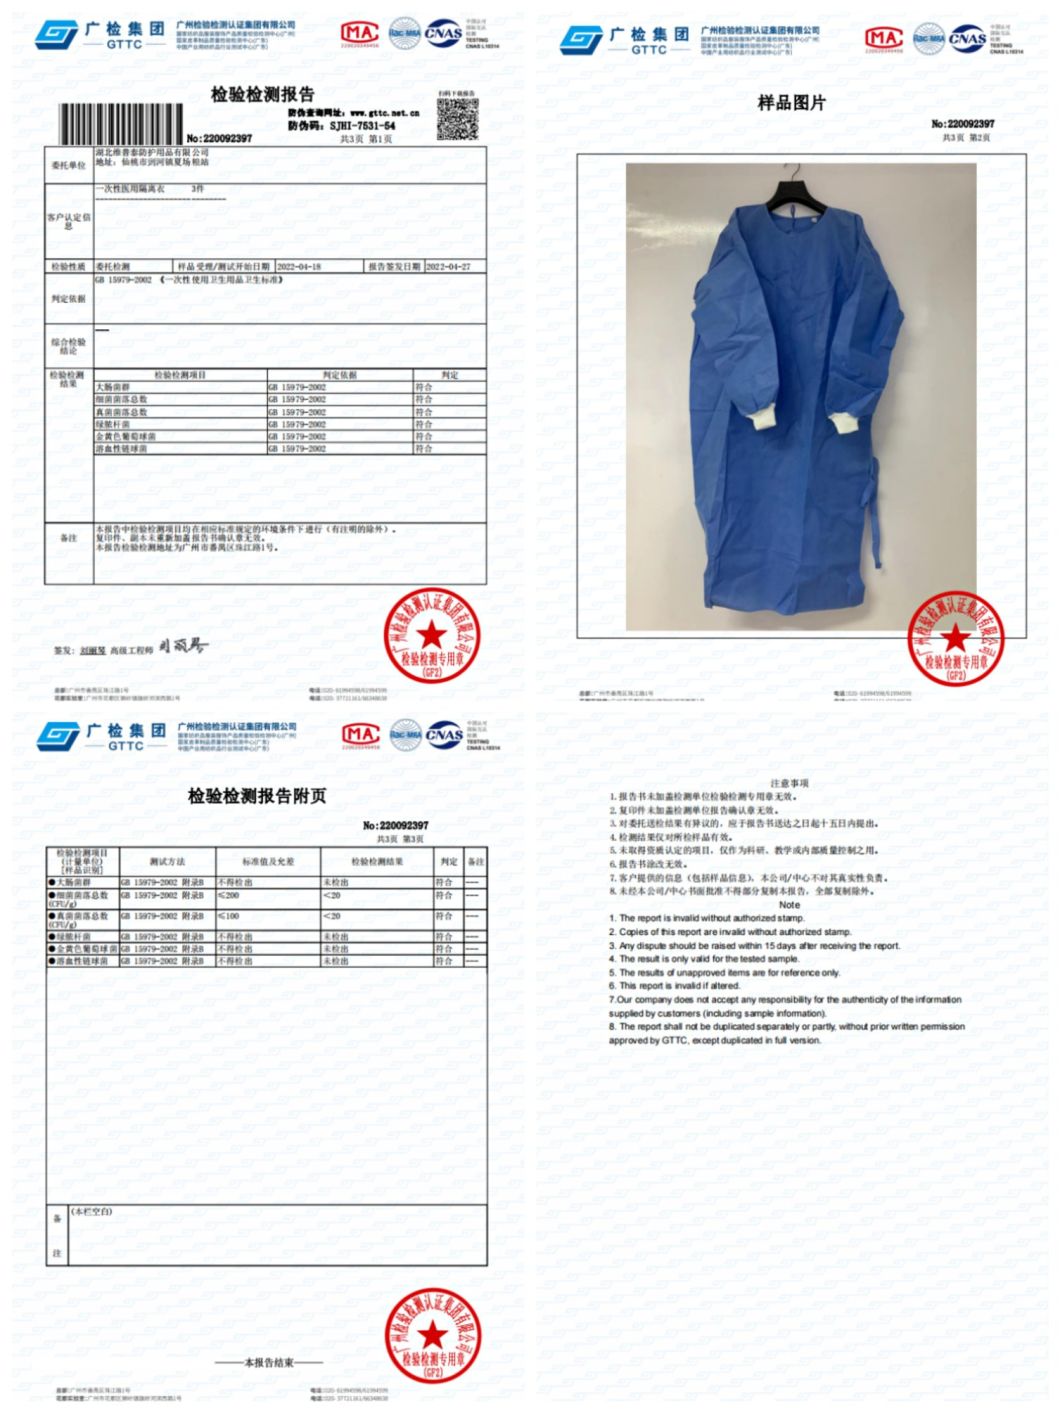 Disposable Non-Sterile Waterproof Isolation Gown SMS Non-Woven Wholesale Visit Gown